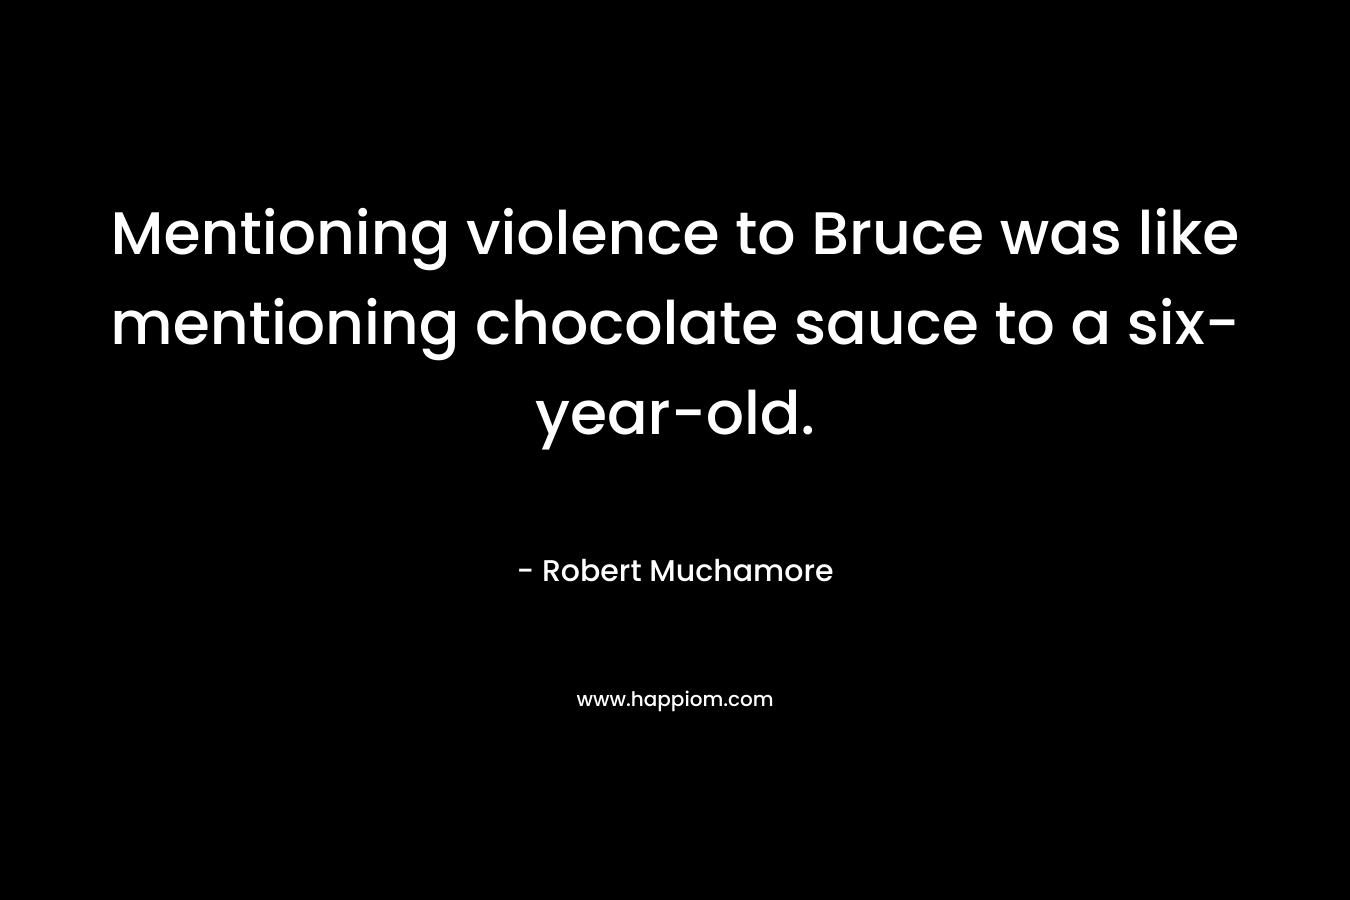 Mentioning violence to Bruce was like mentioning chocolate sauce to a six-year-old.